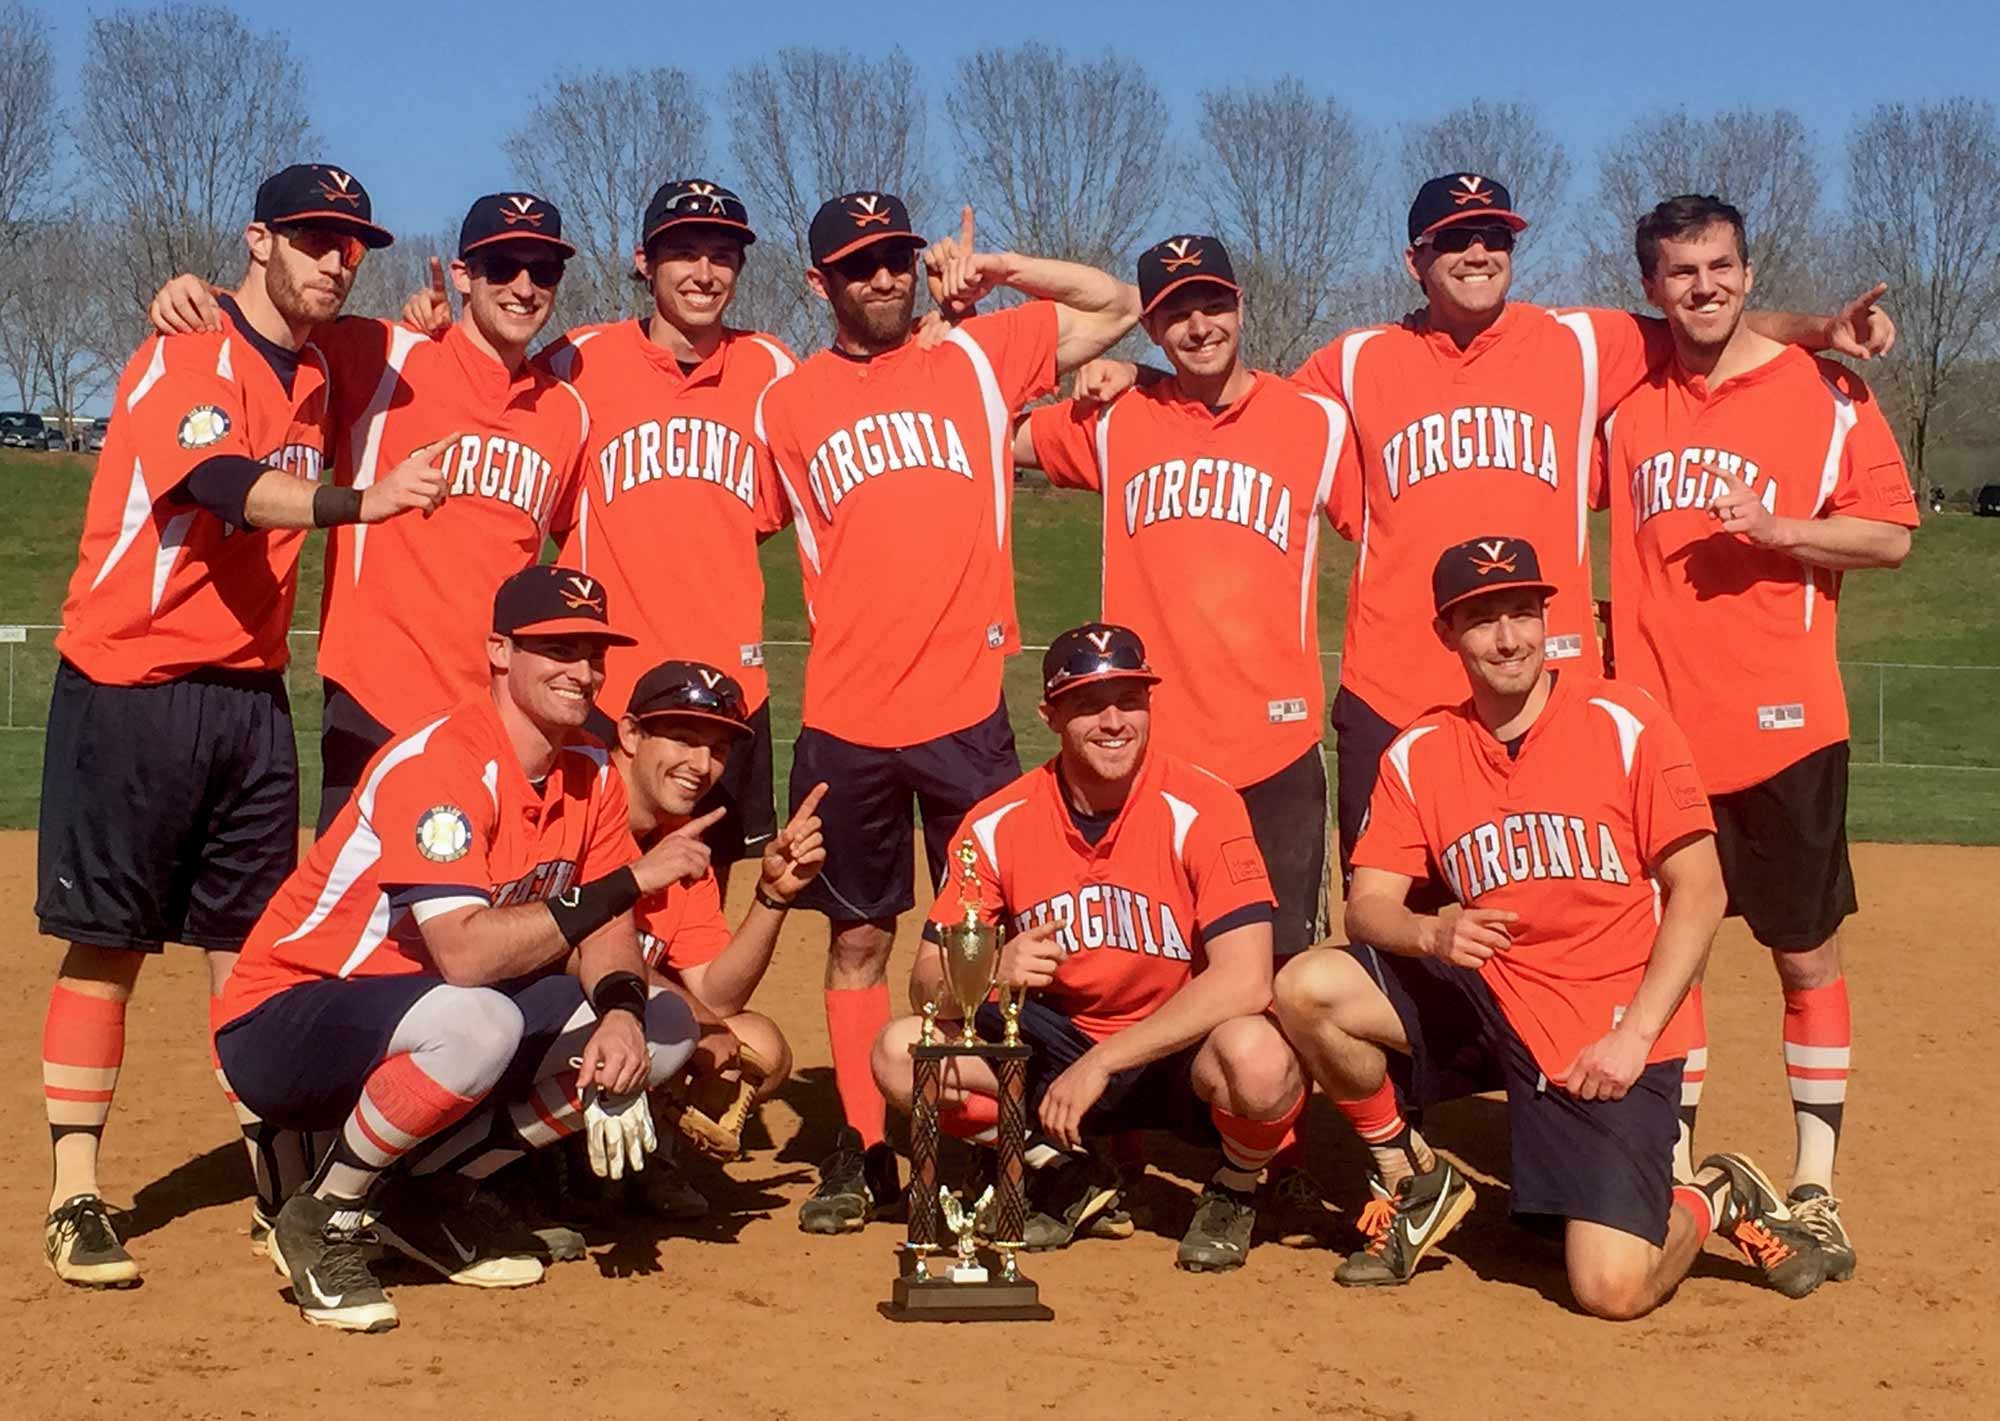 Group photo of the North Grounds Softball League at UVA